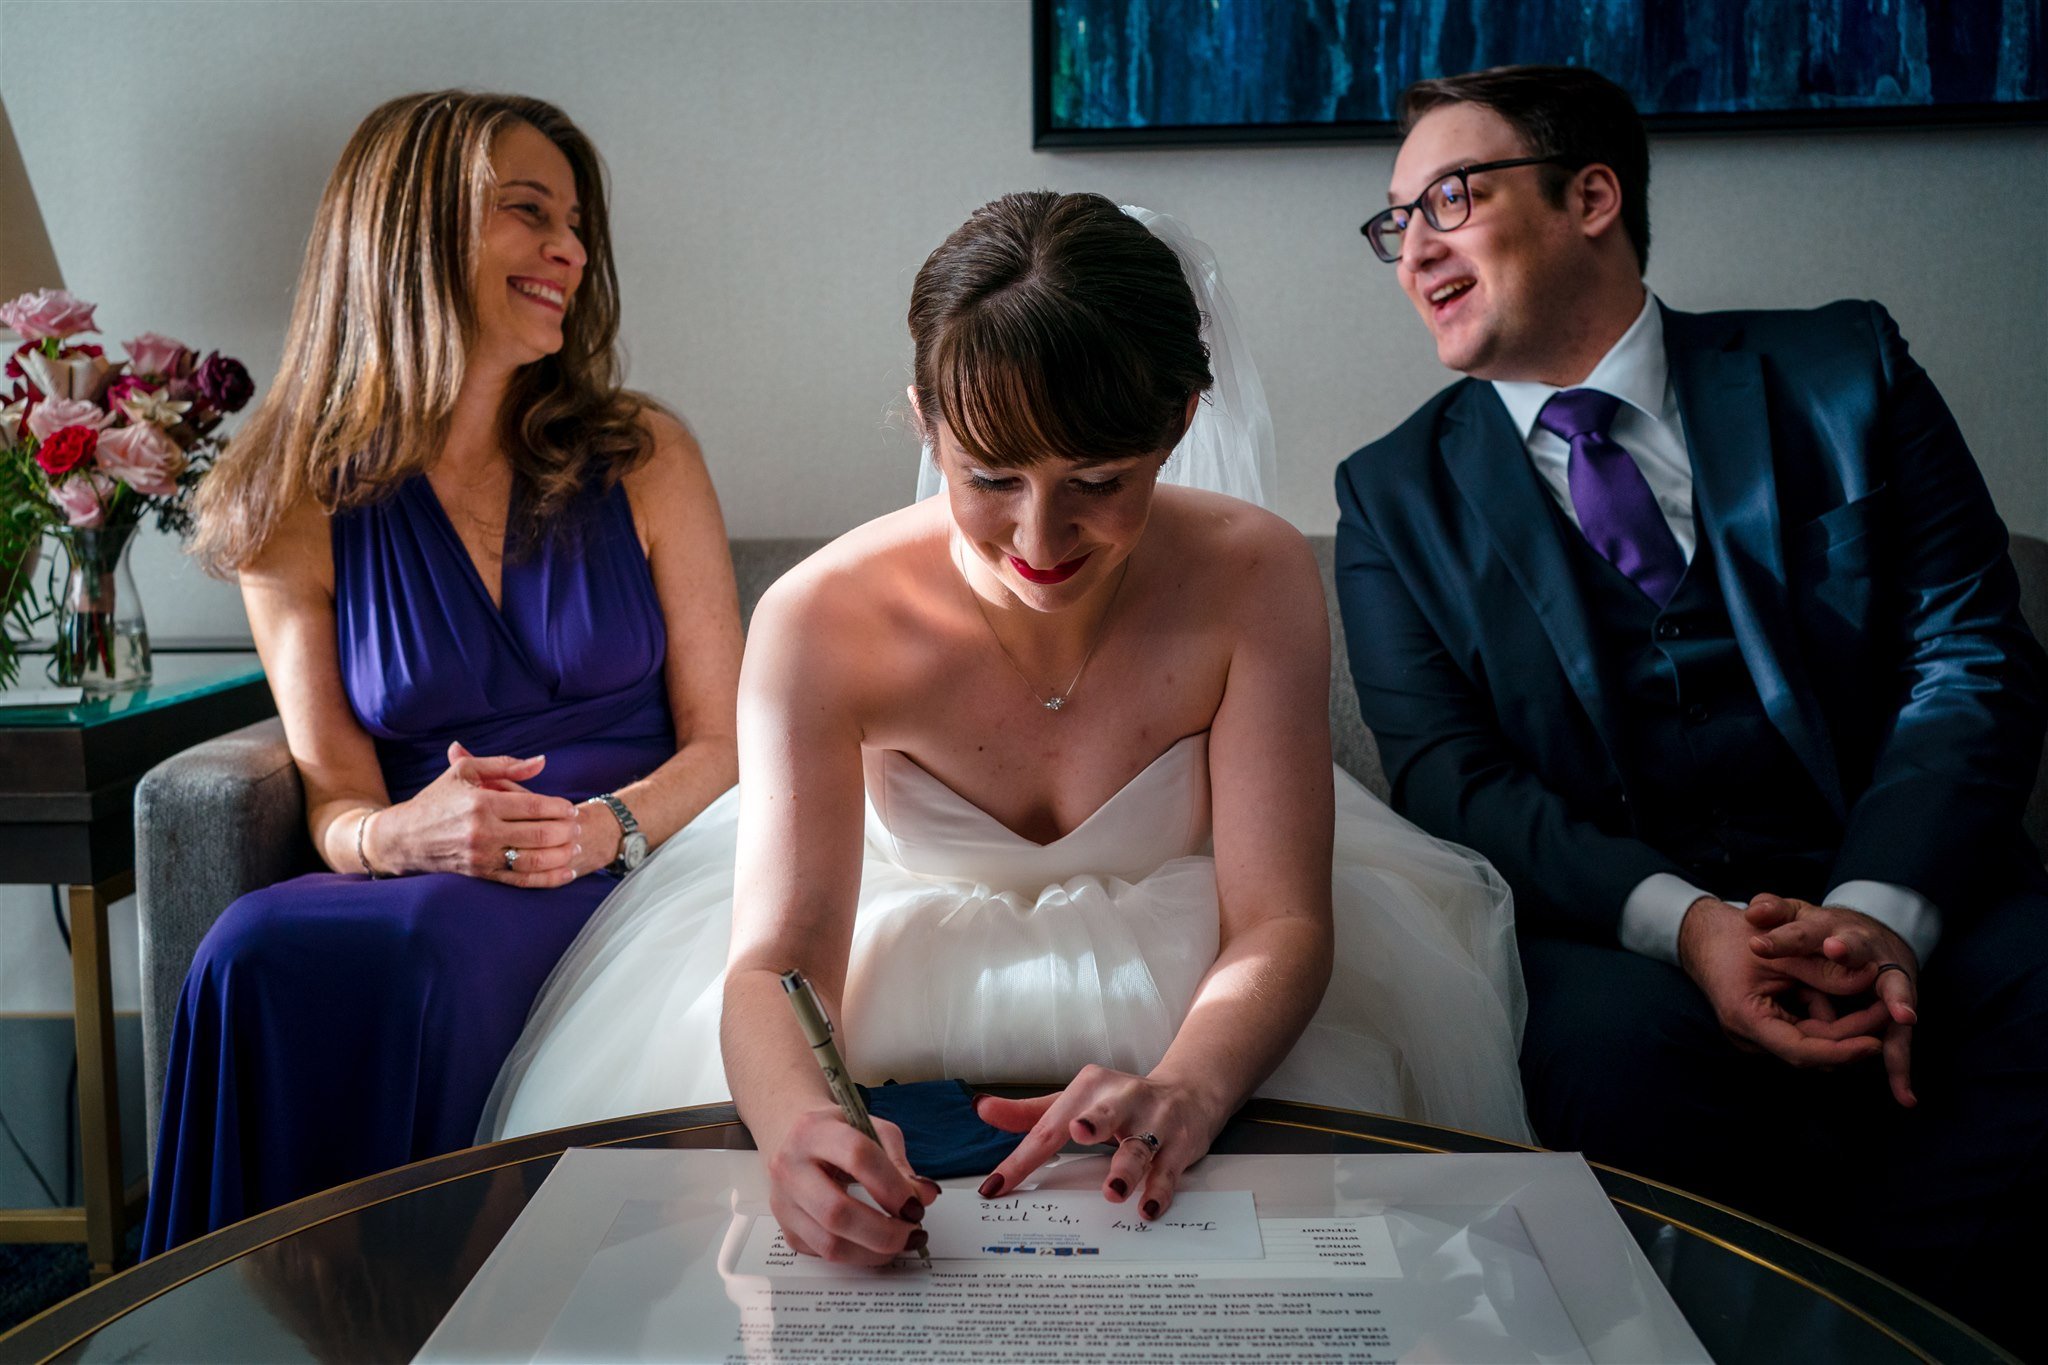 D042-Ketubah-Signing-Intercontinental-at-the-Wharf-DC-Wedding-Photography-by-Bee-Two-Sweet.jpg